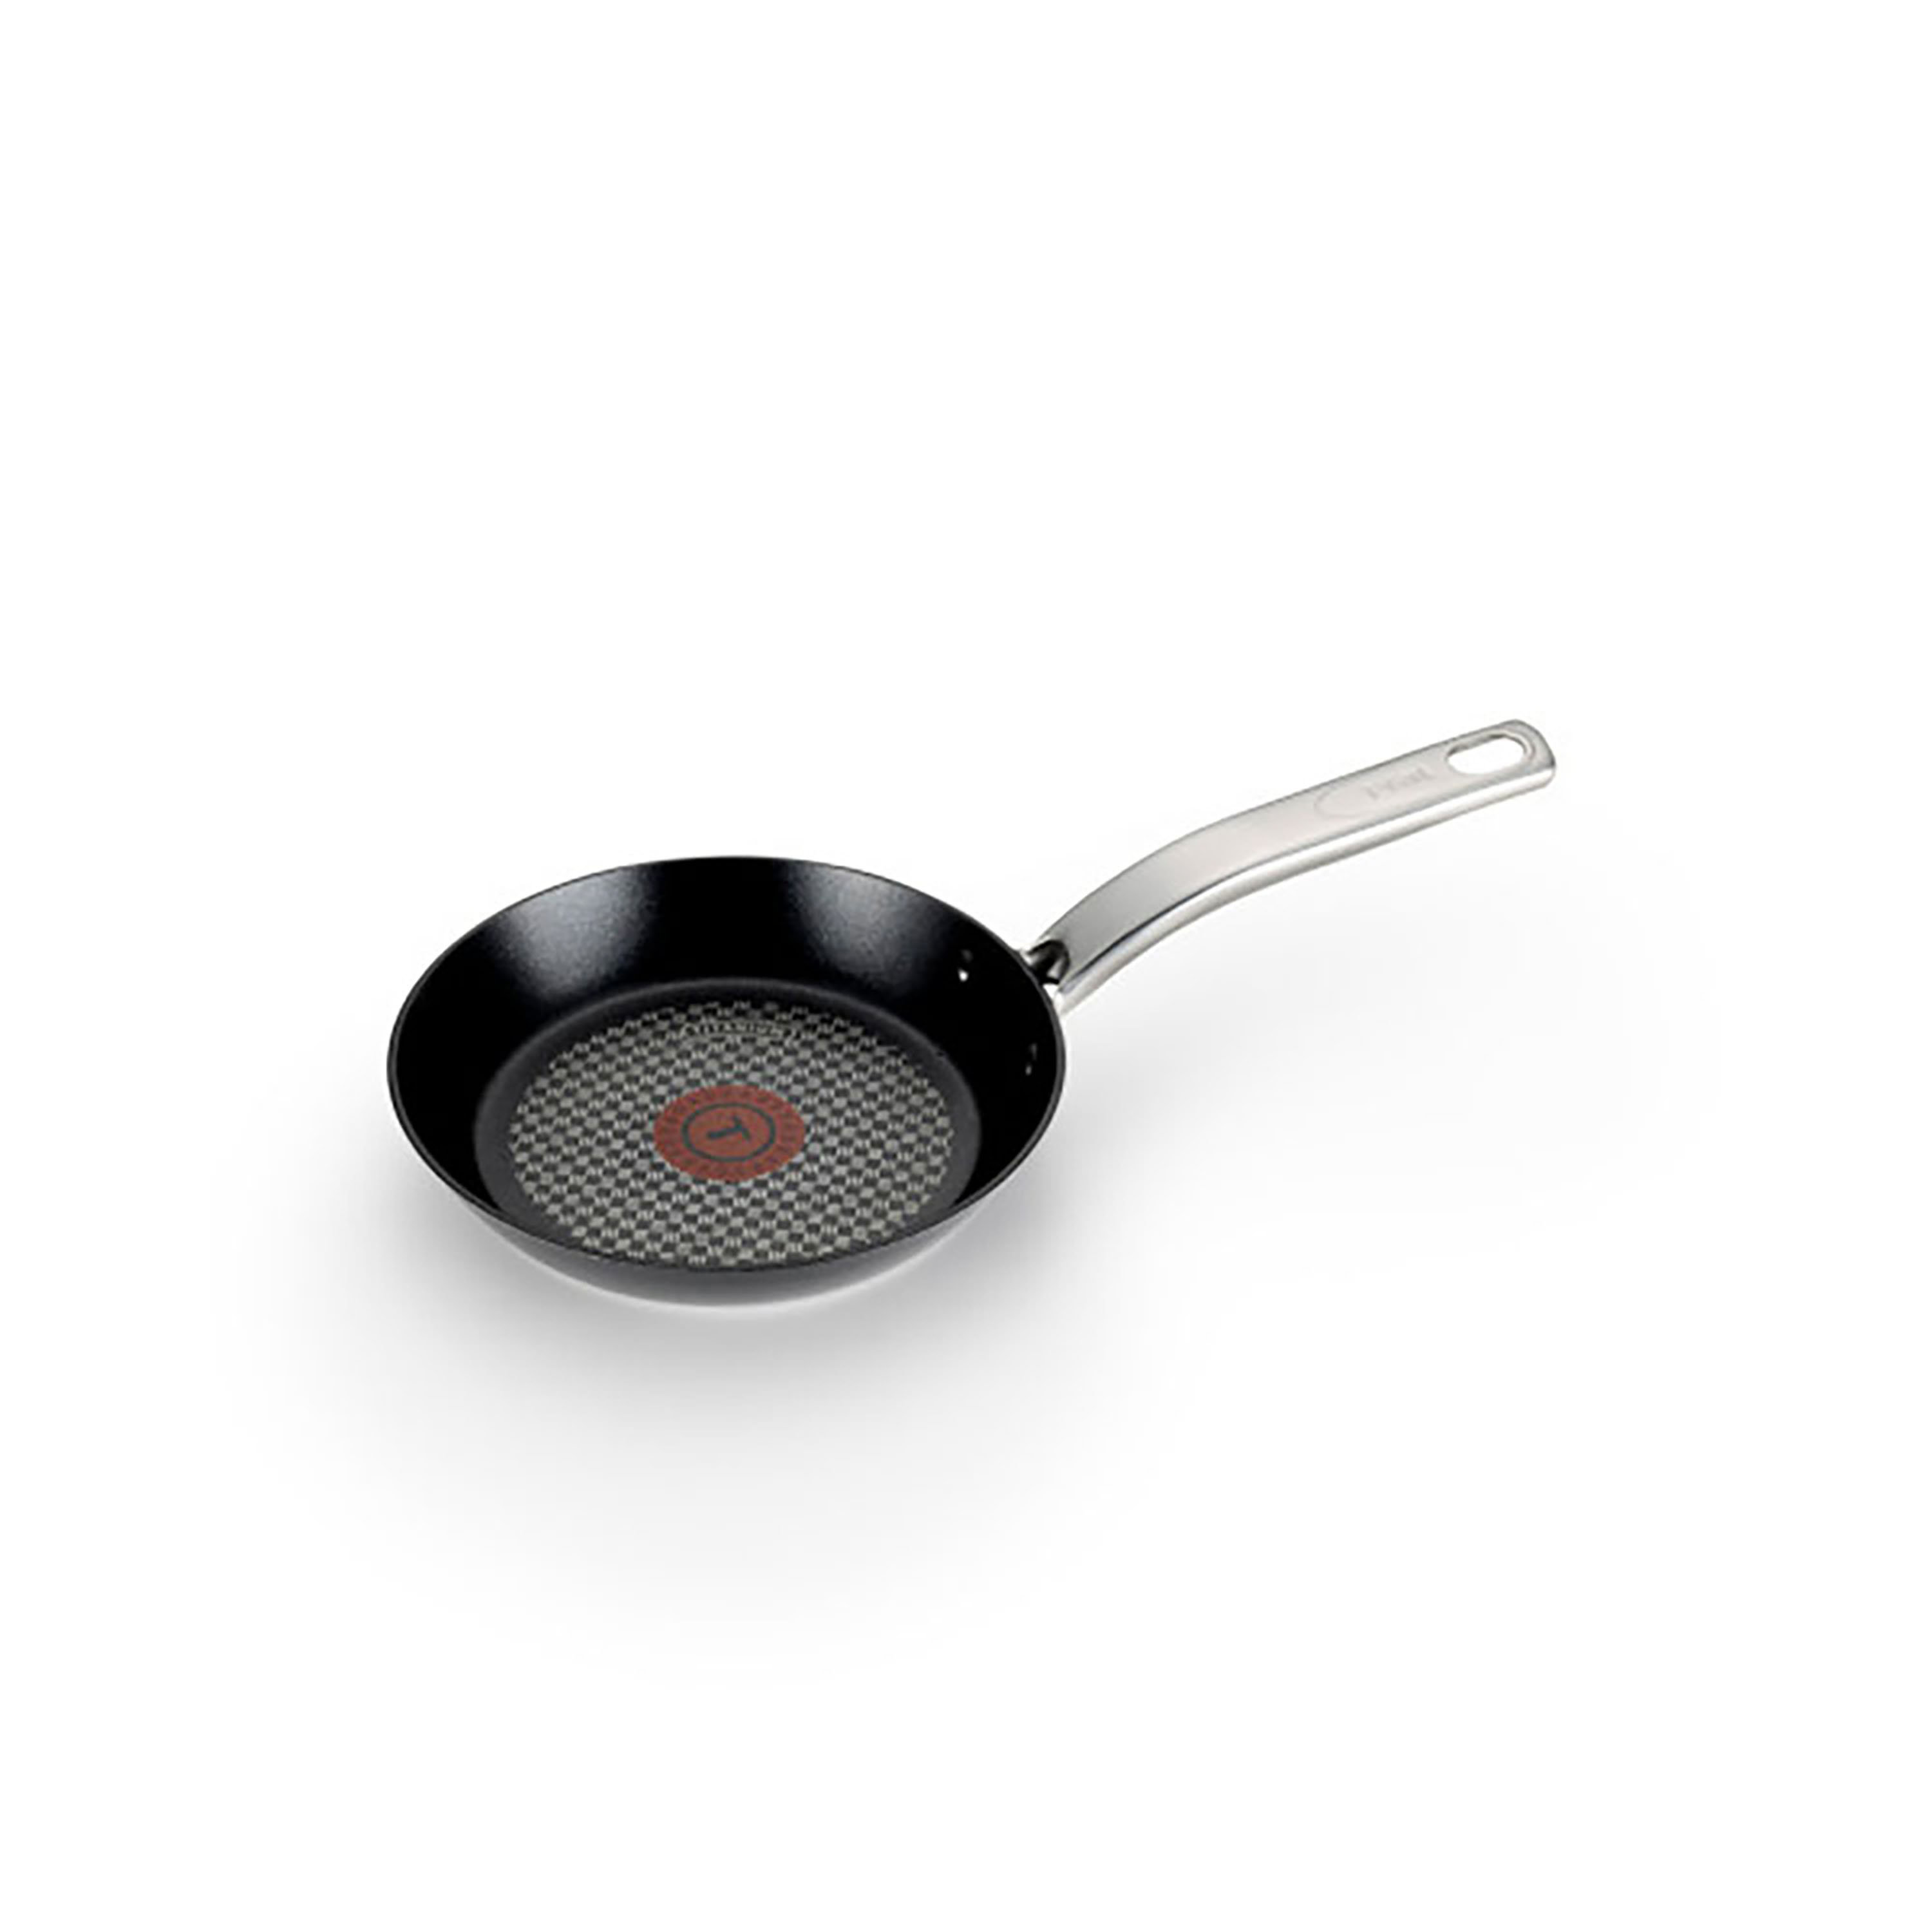 T-fal PerformaPro Stainless Steel Frying Pan, 12 inch & Reviews